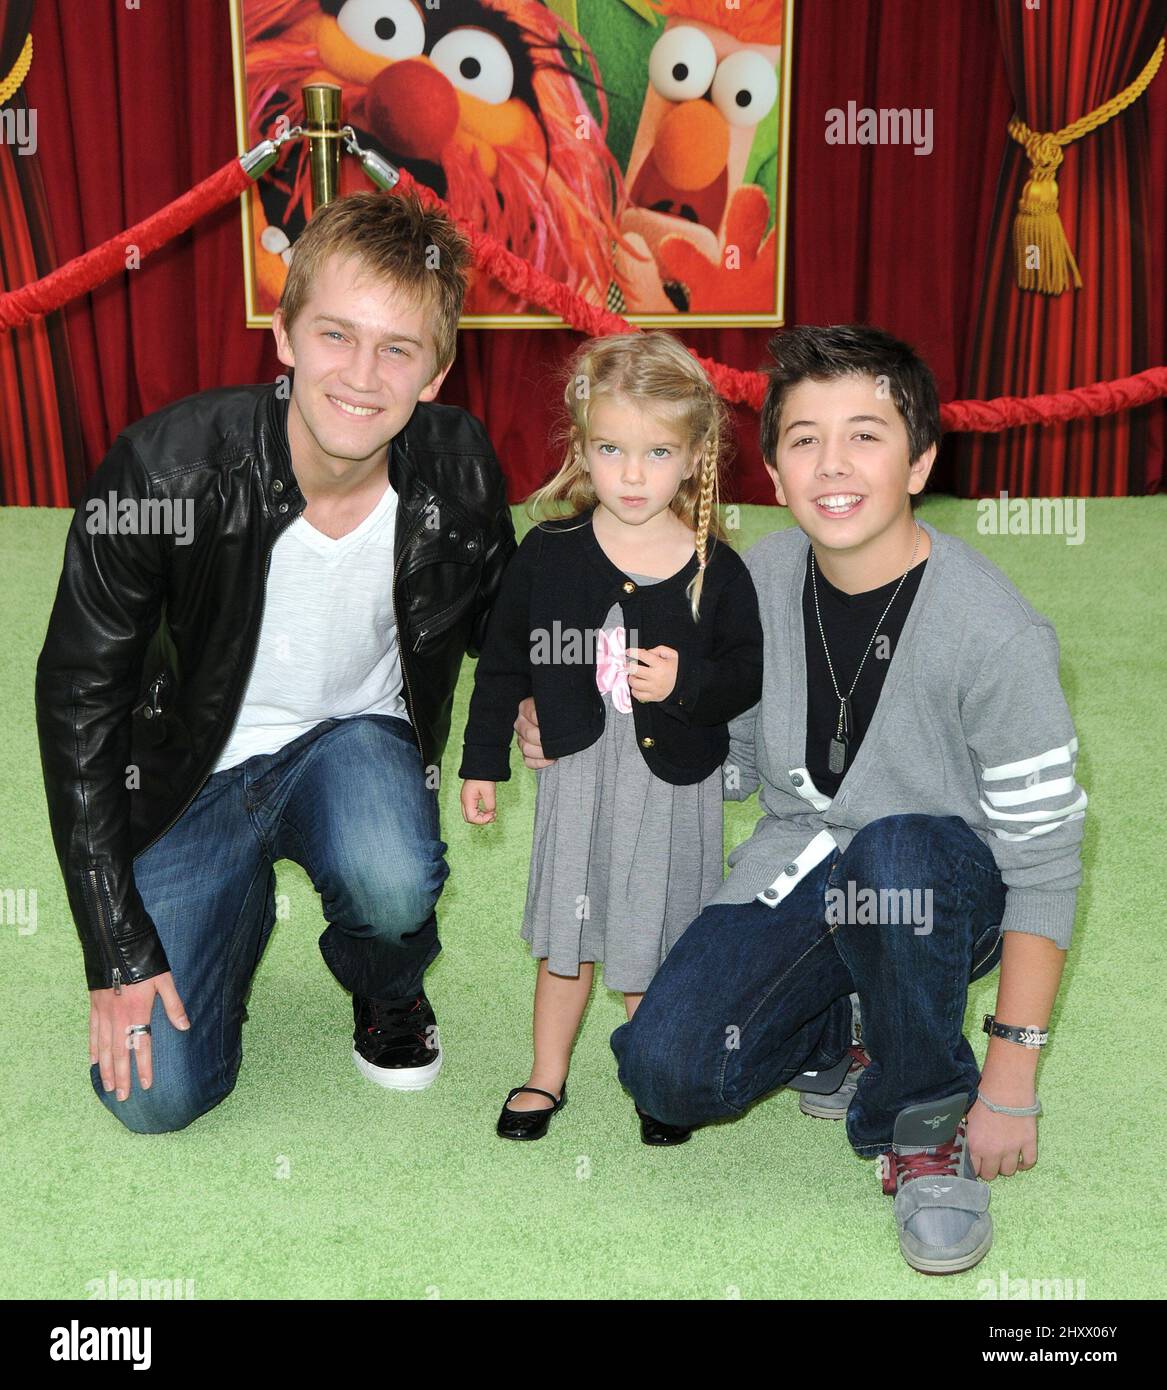 James Dolley, Bradley Steven Perry and Mia Talerico attending 'The Muppets' premiere held at the El Capitan Theatre in Los Angeles, USA. Stock Photo